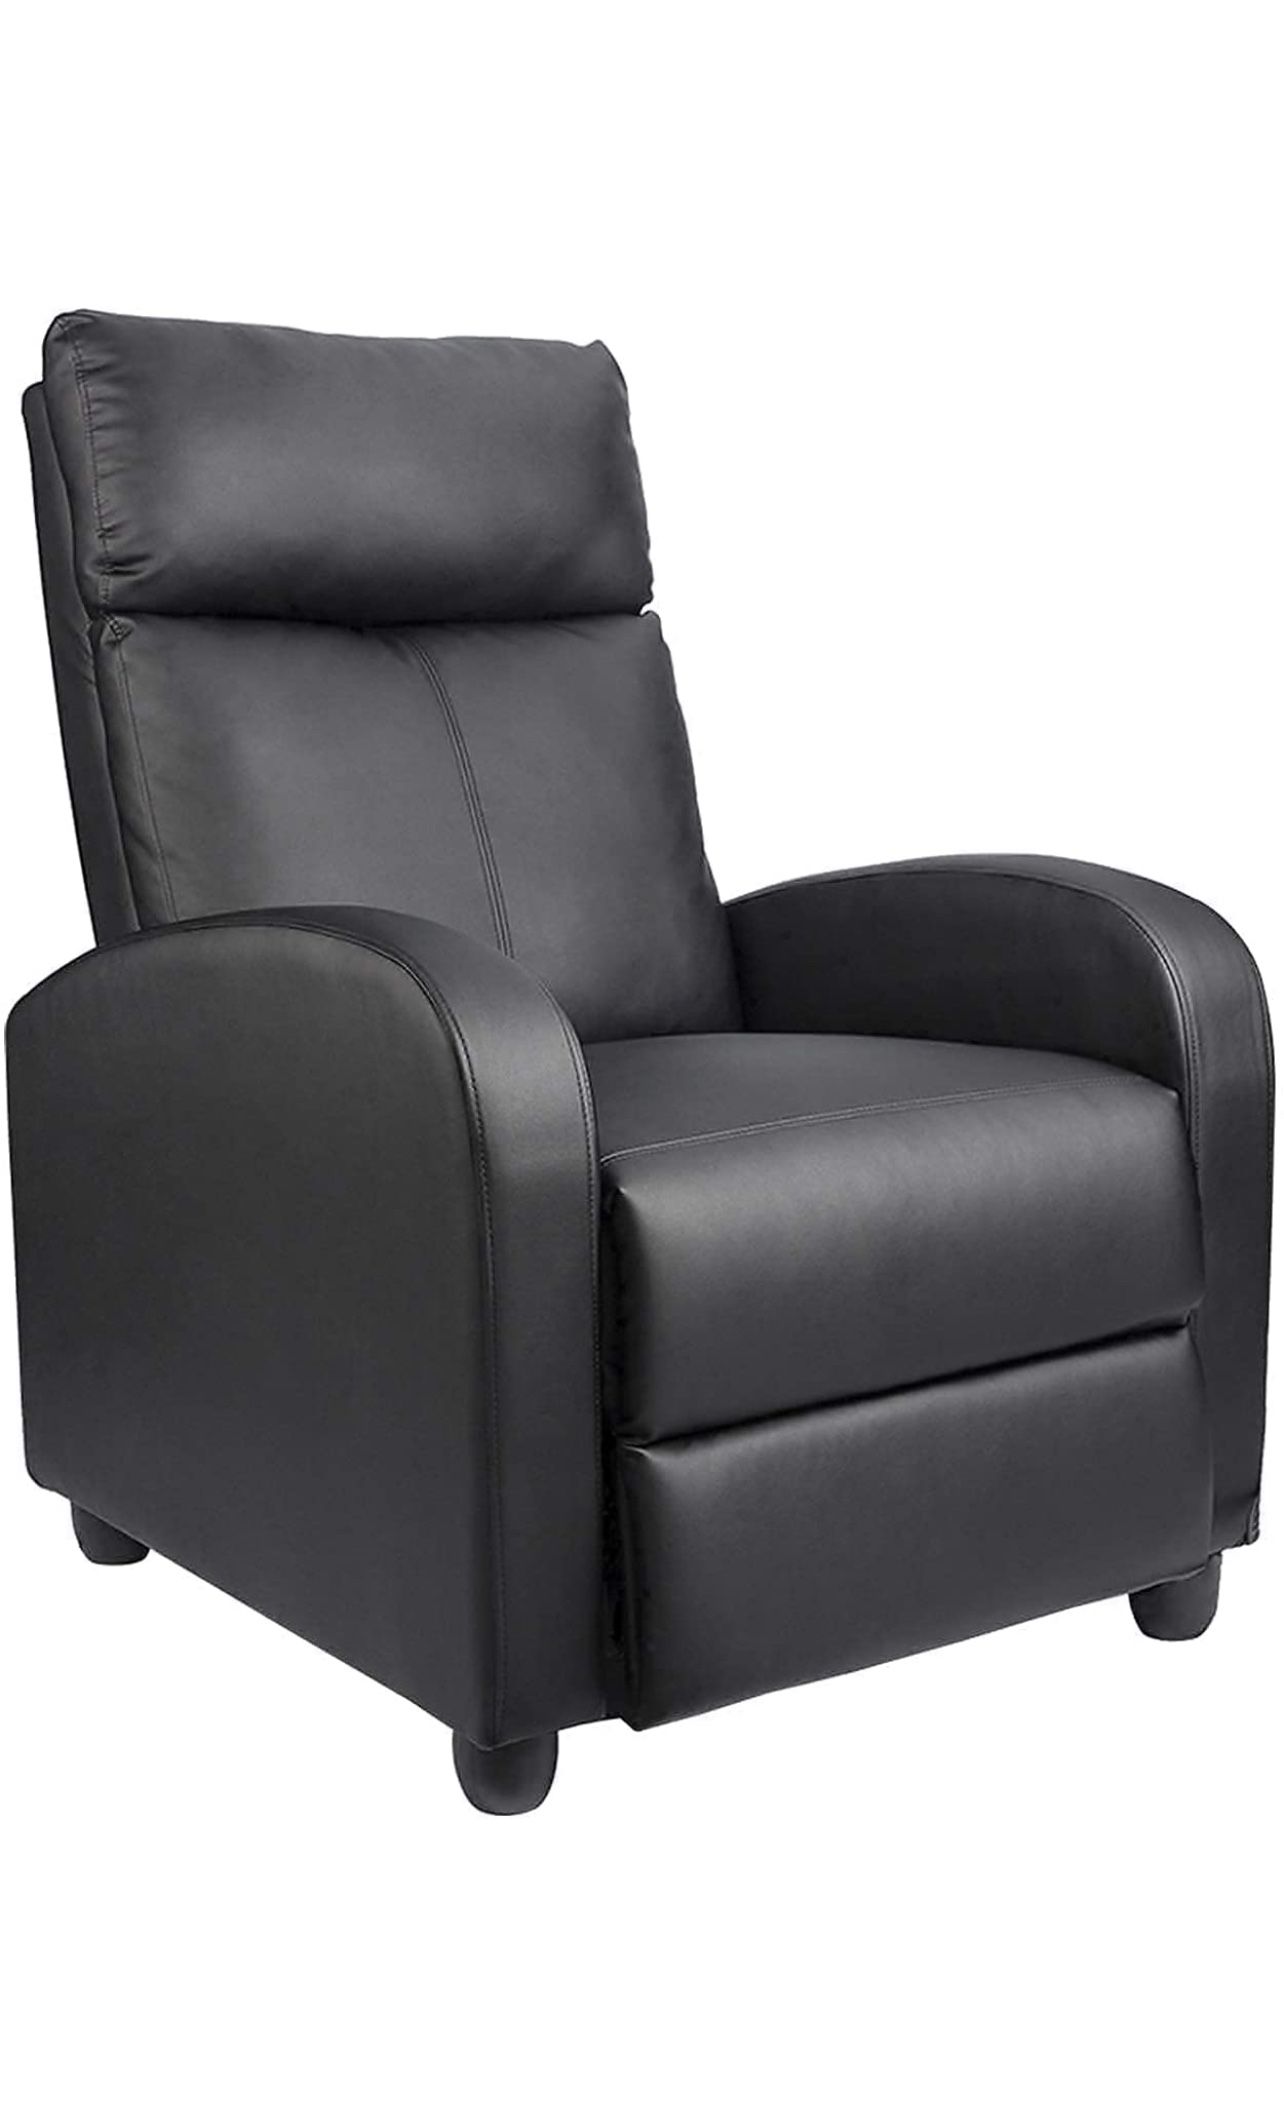 Recliner Massage Chair - Take Both Or Just One!